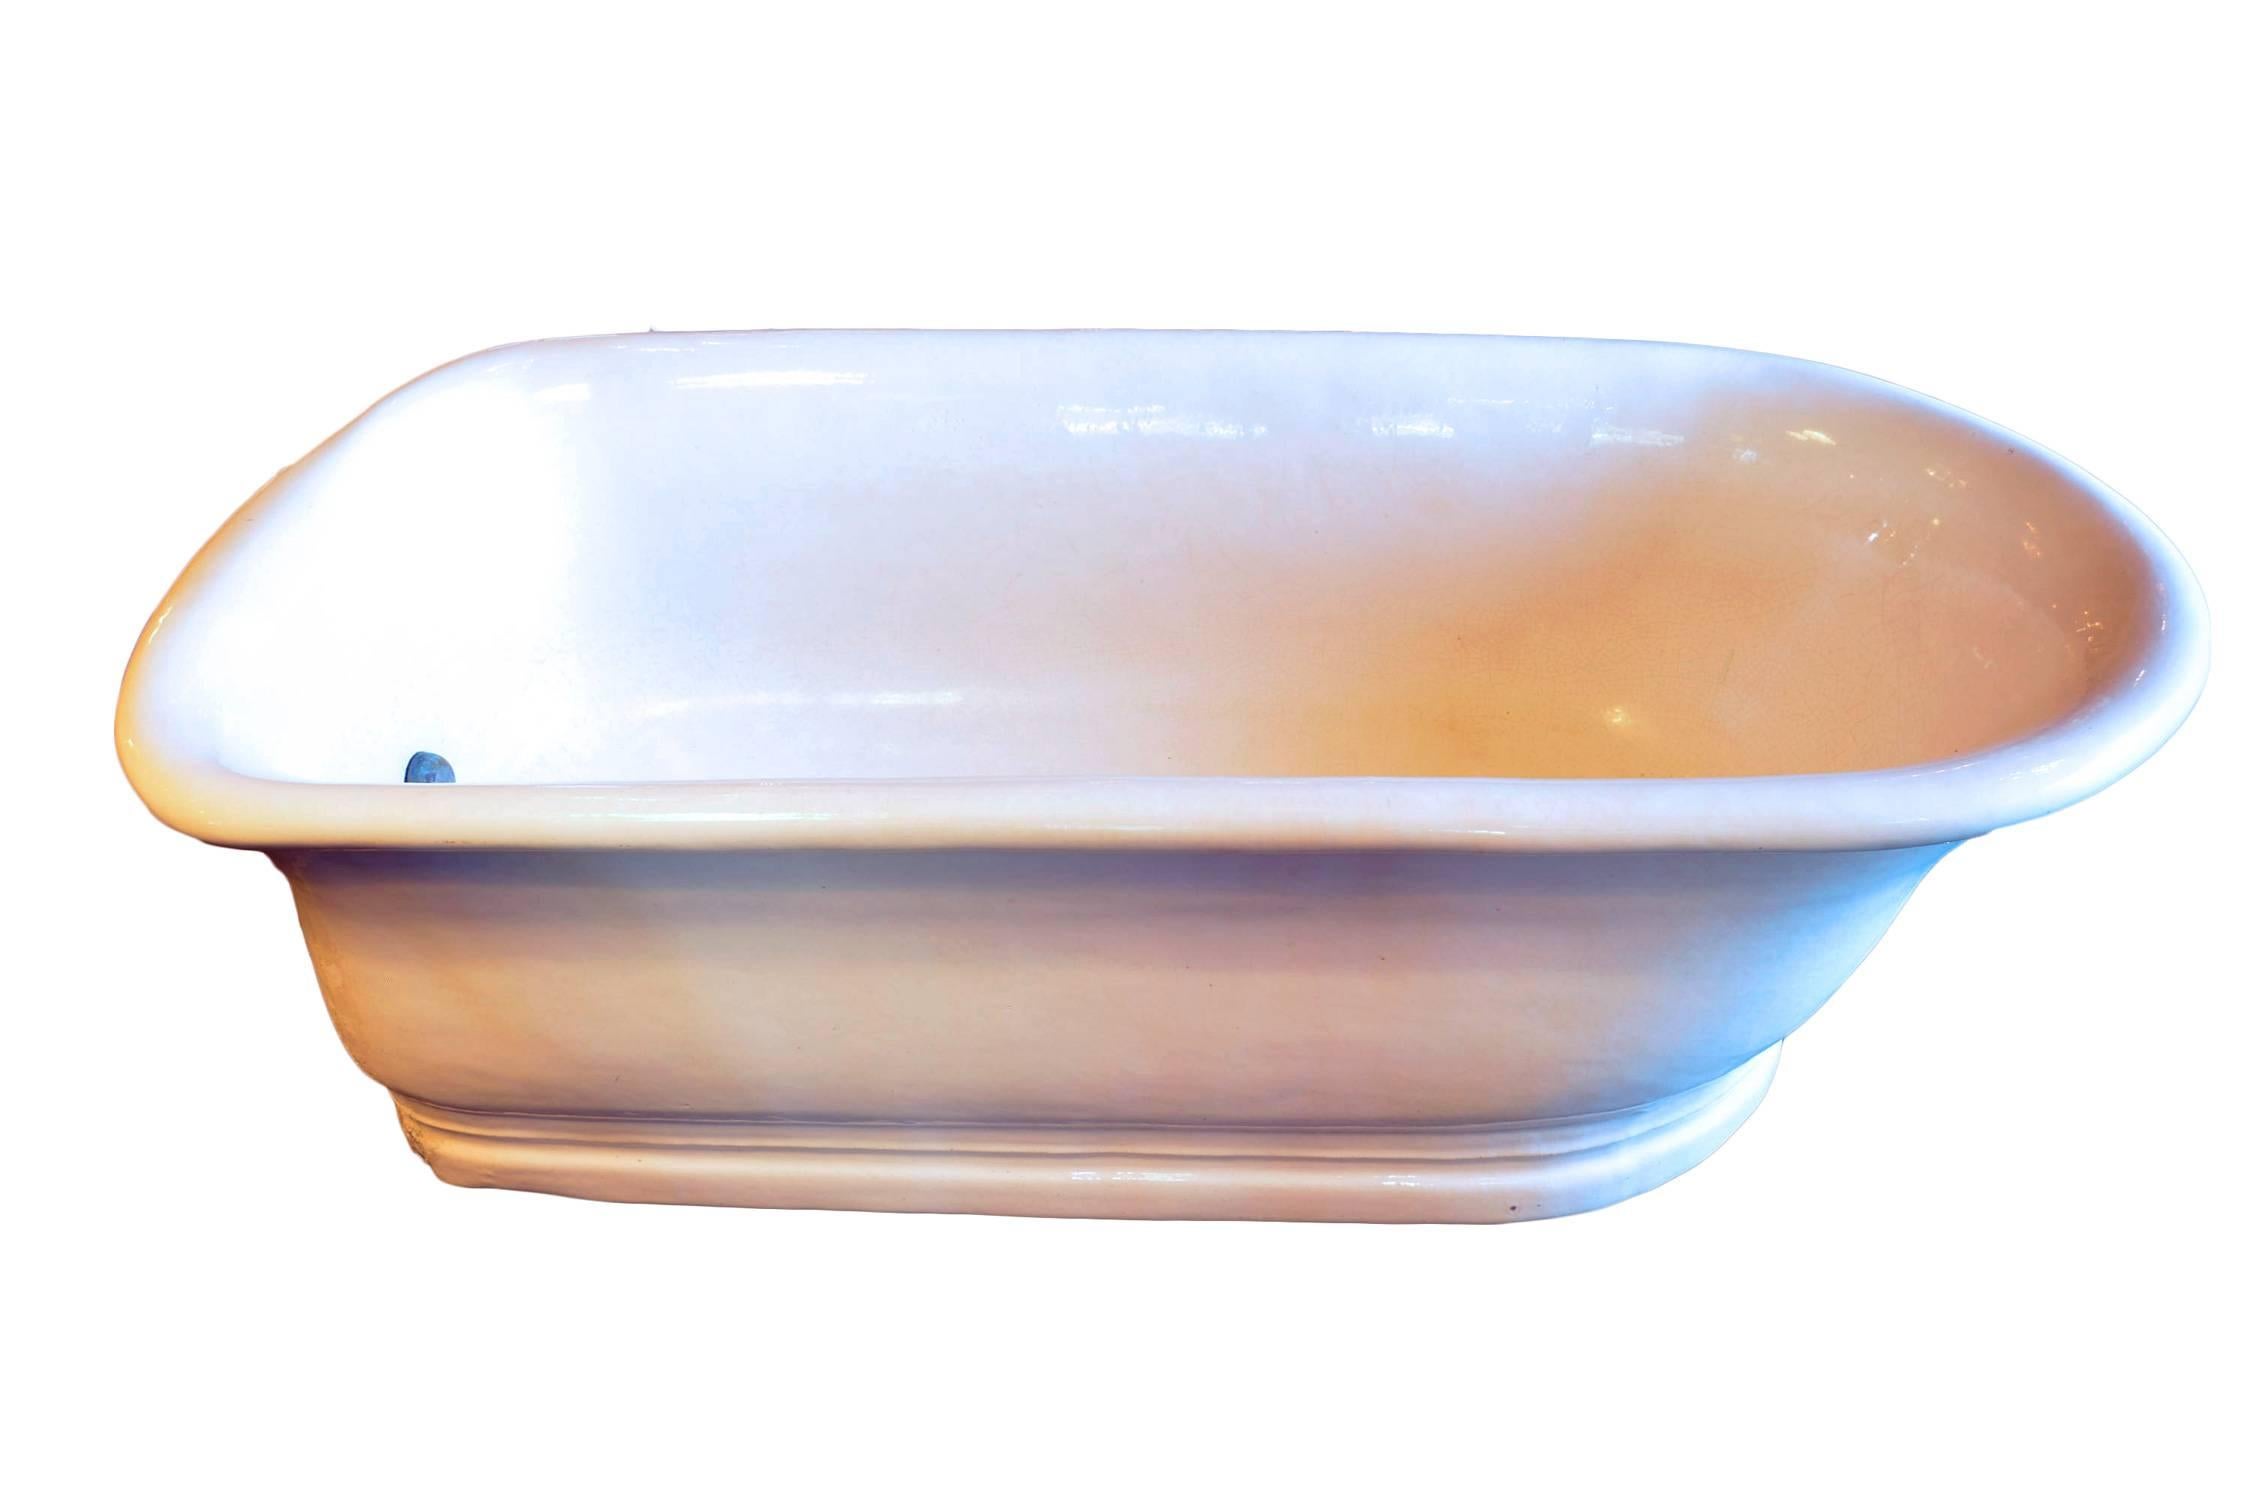 A beautiful china bathtub from the early 1900s. It is in perfect condition, without chips or cracks and with mild crazing throughout the original glaze.